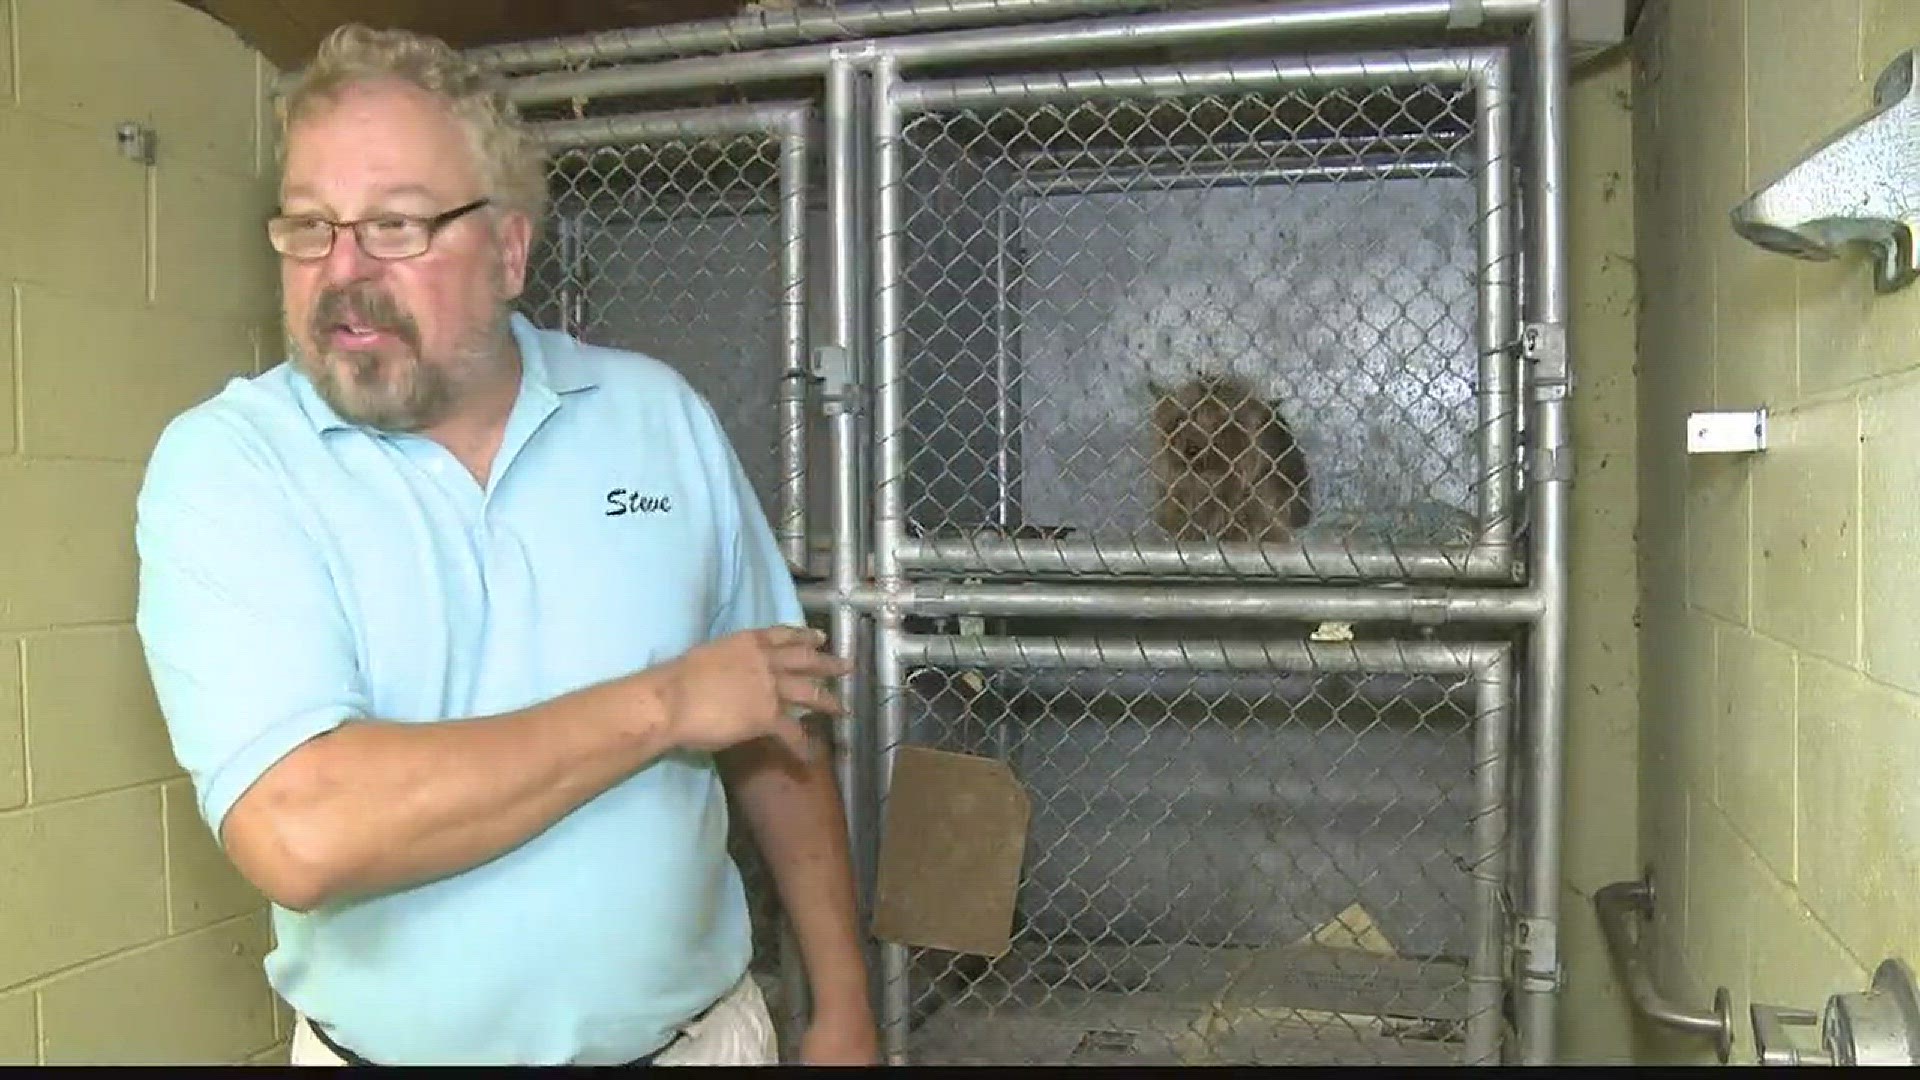 Concerns over conditions at Dunkirk Animal Shelter